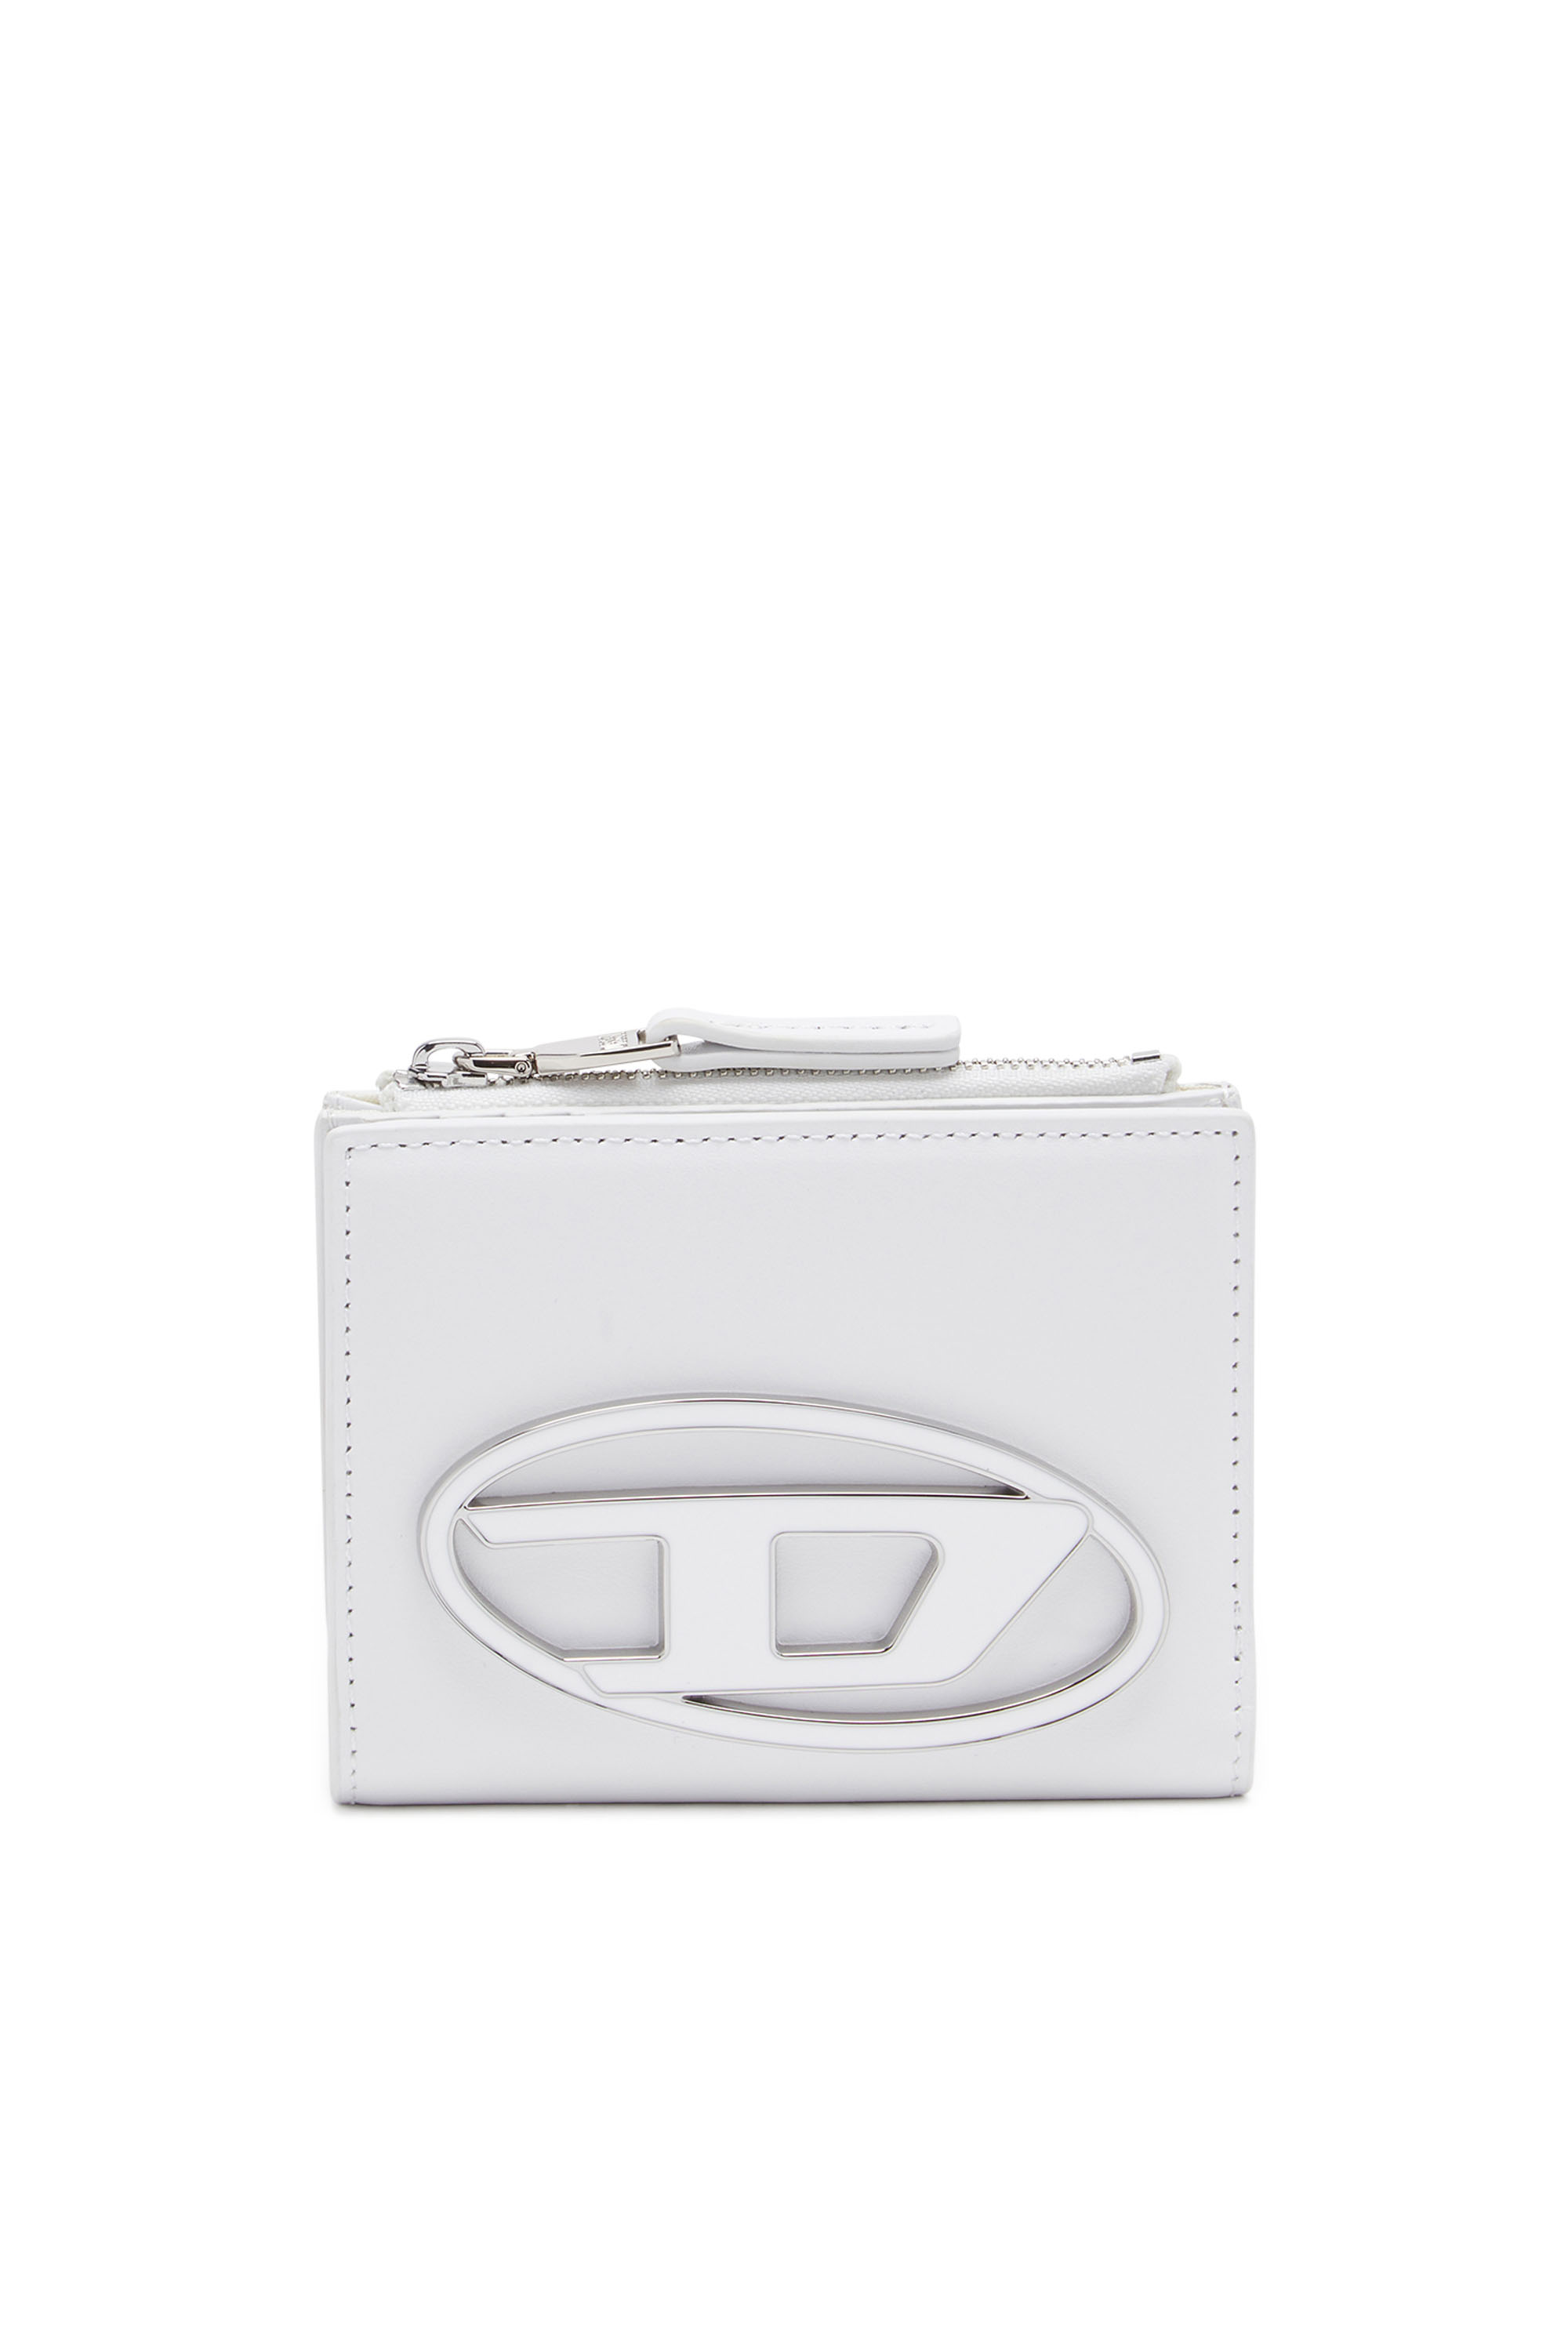 Diesel - Small leather wallet with logo plaque - Small Wallets - Woman - White